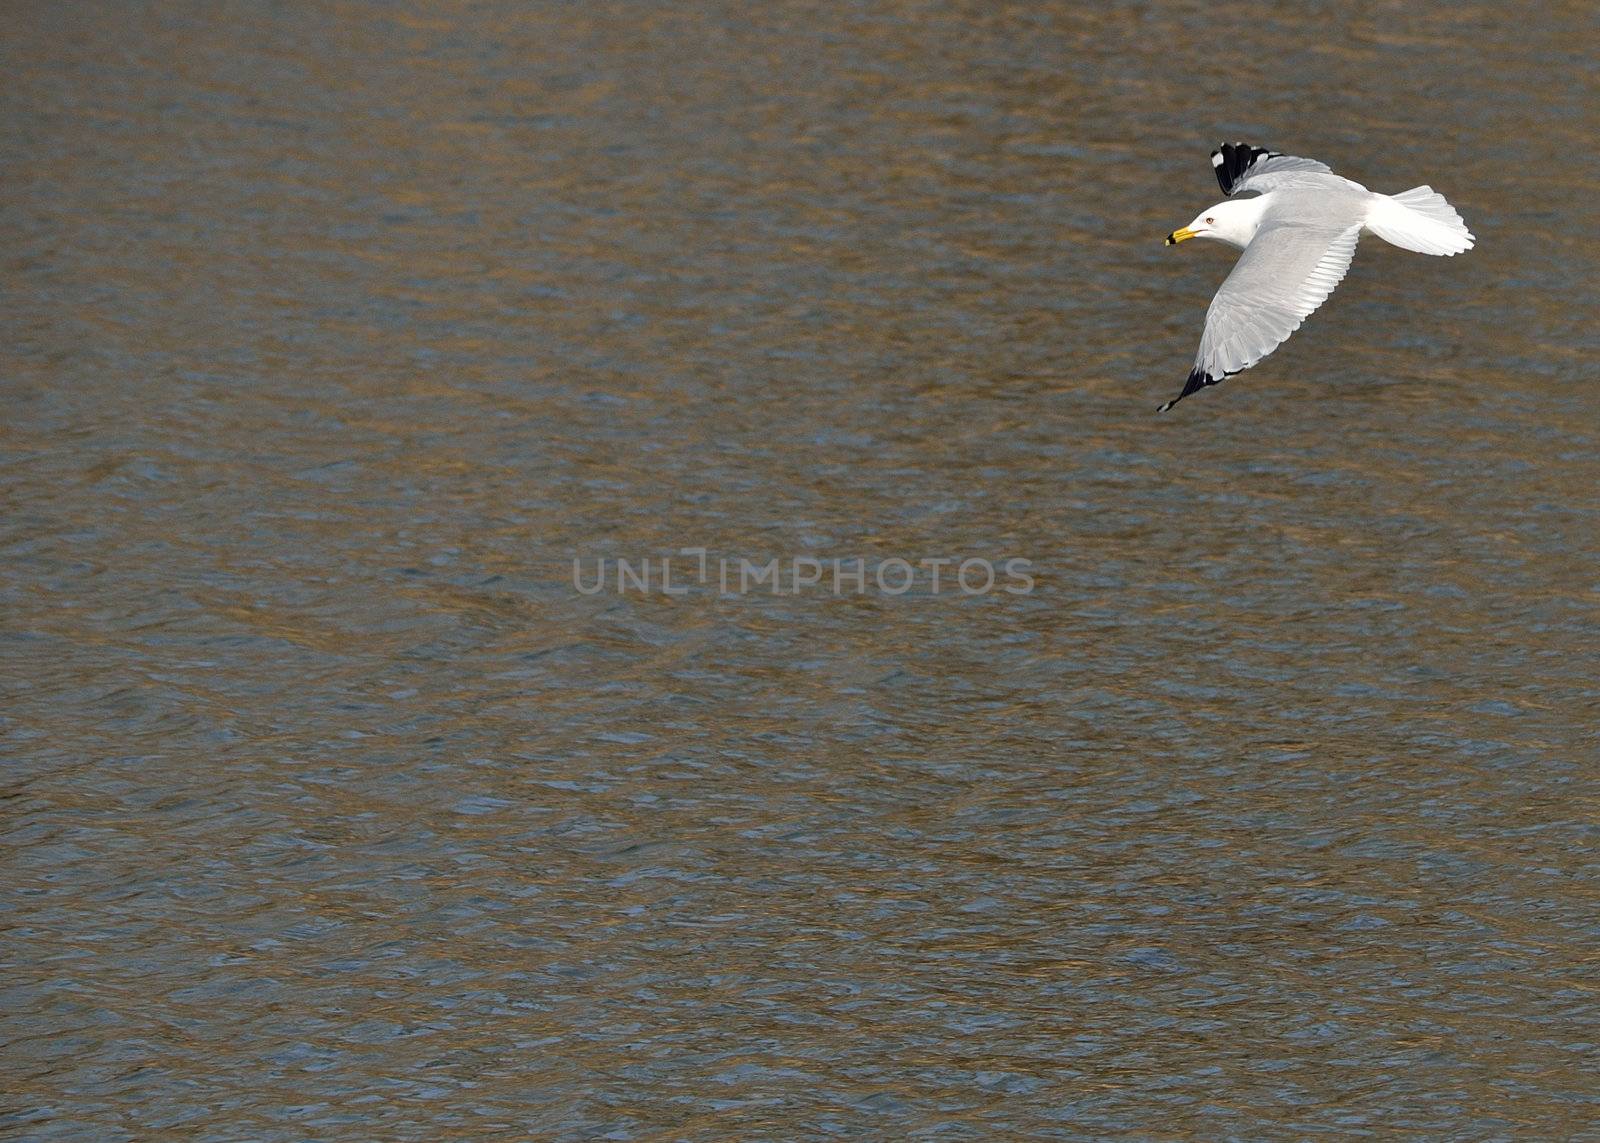 A ring-billed seagull in flight across a body of water.